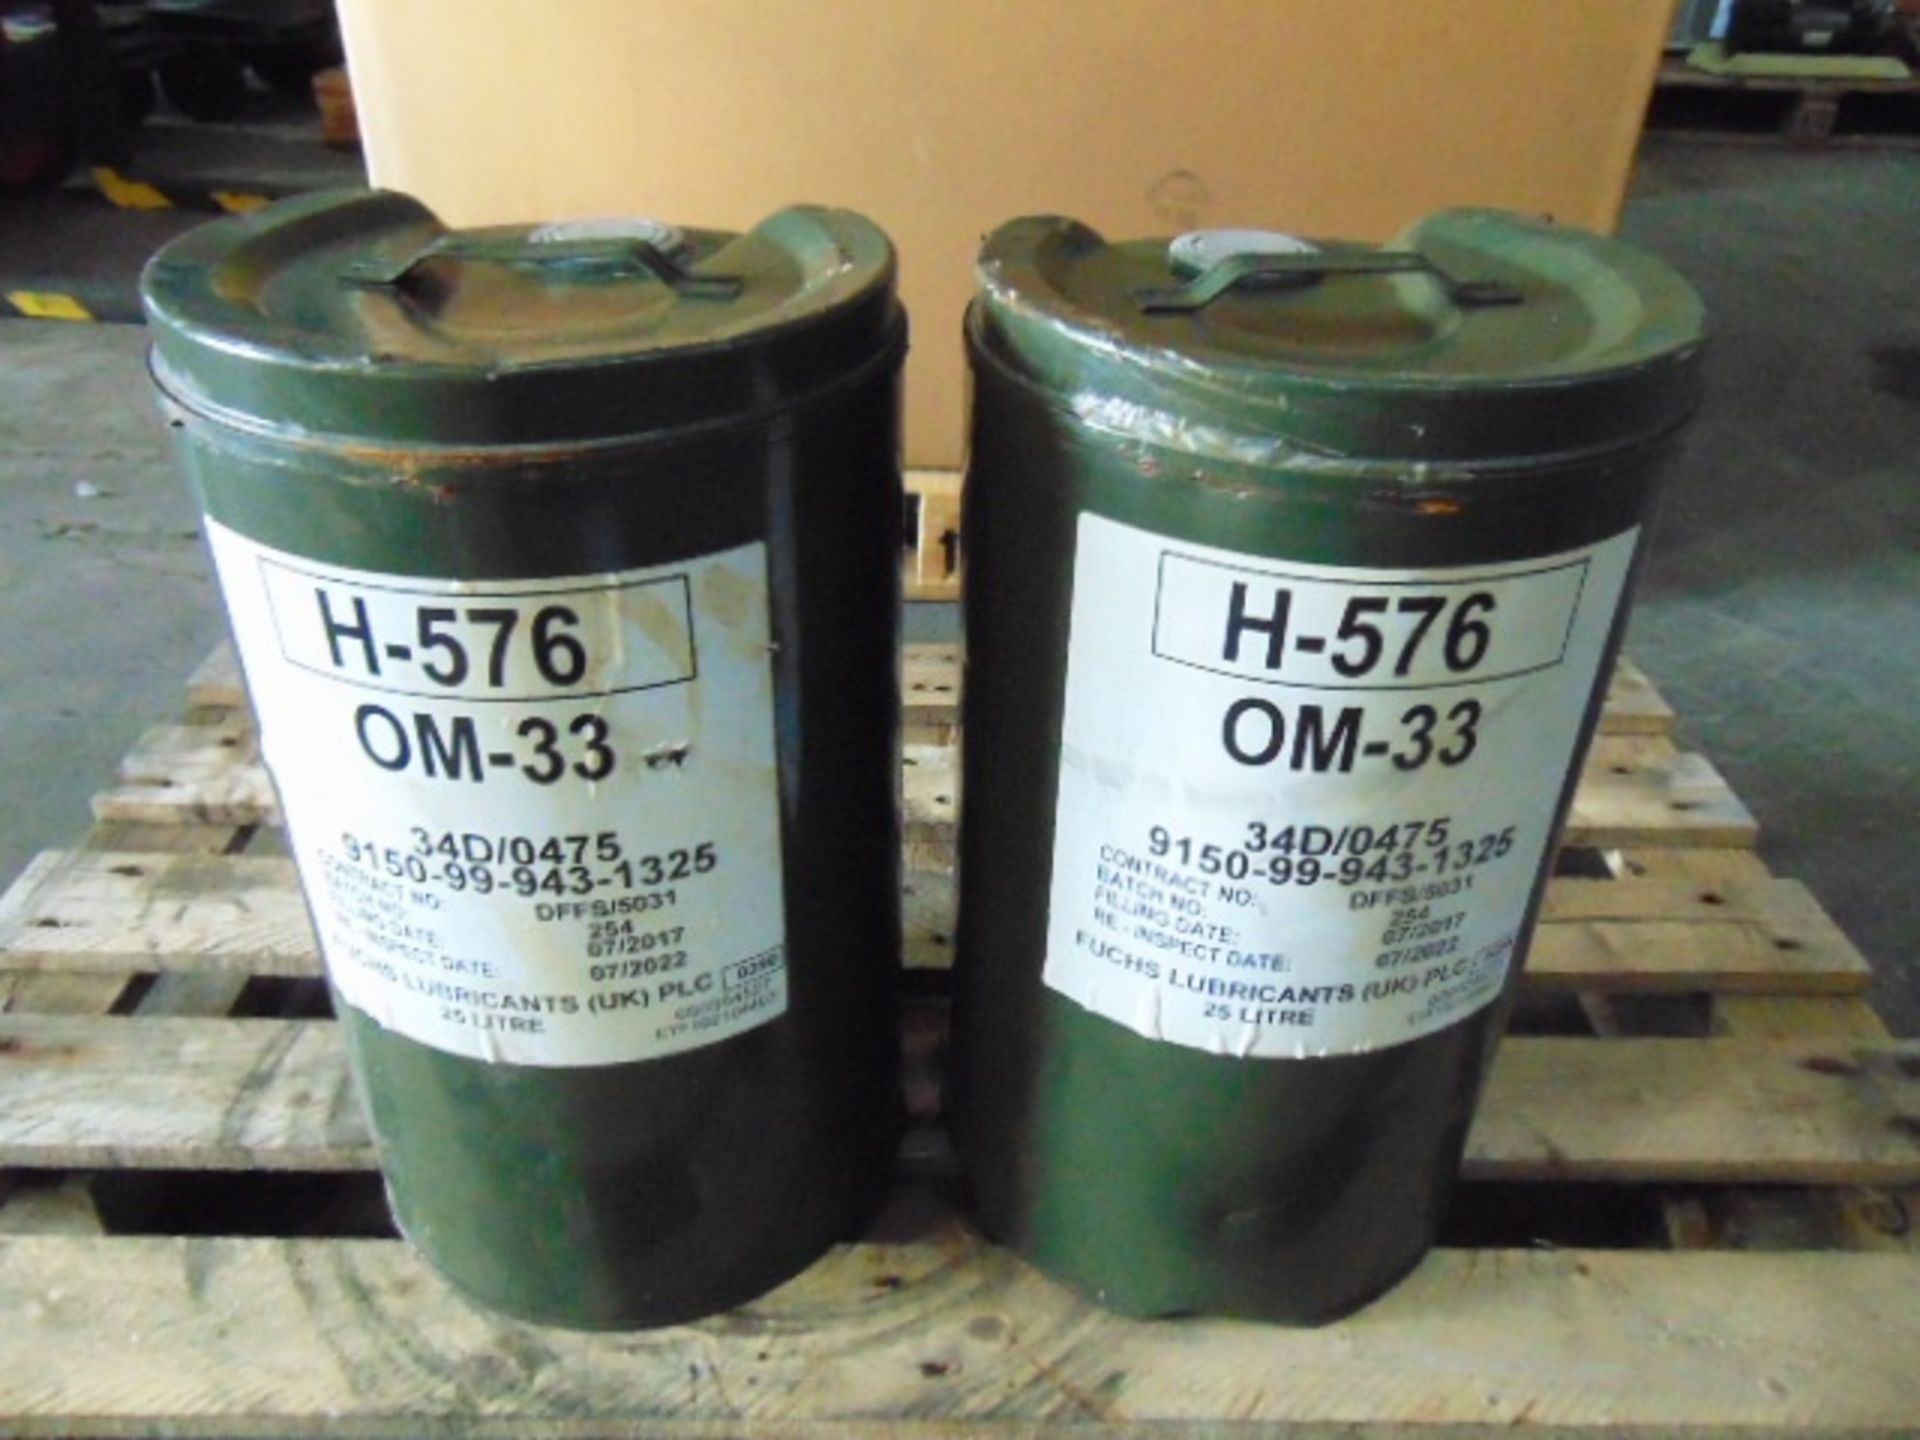 2 x Unissued 25L Drums of H-576 OM-33 Hydraulic Oil